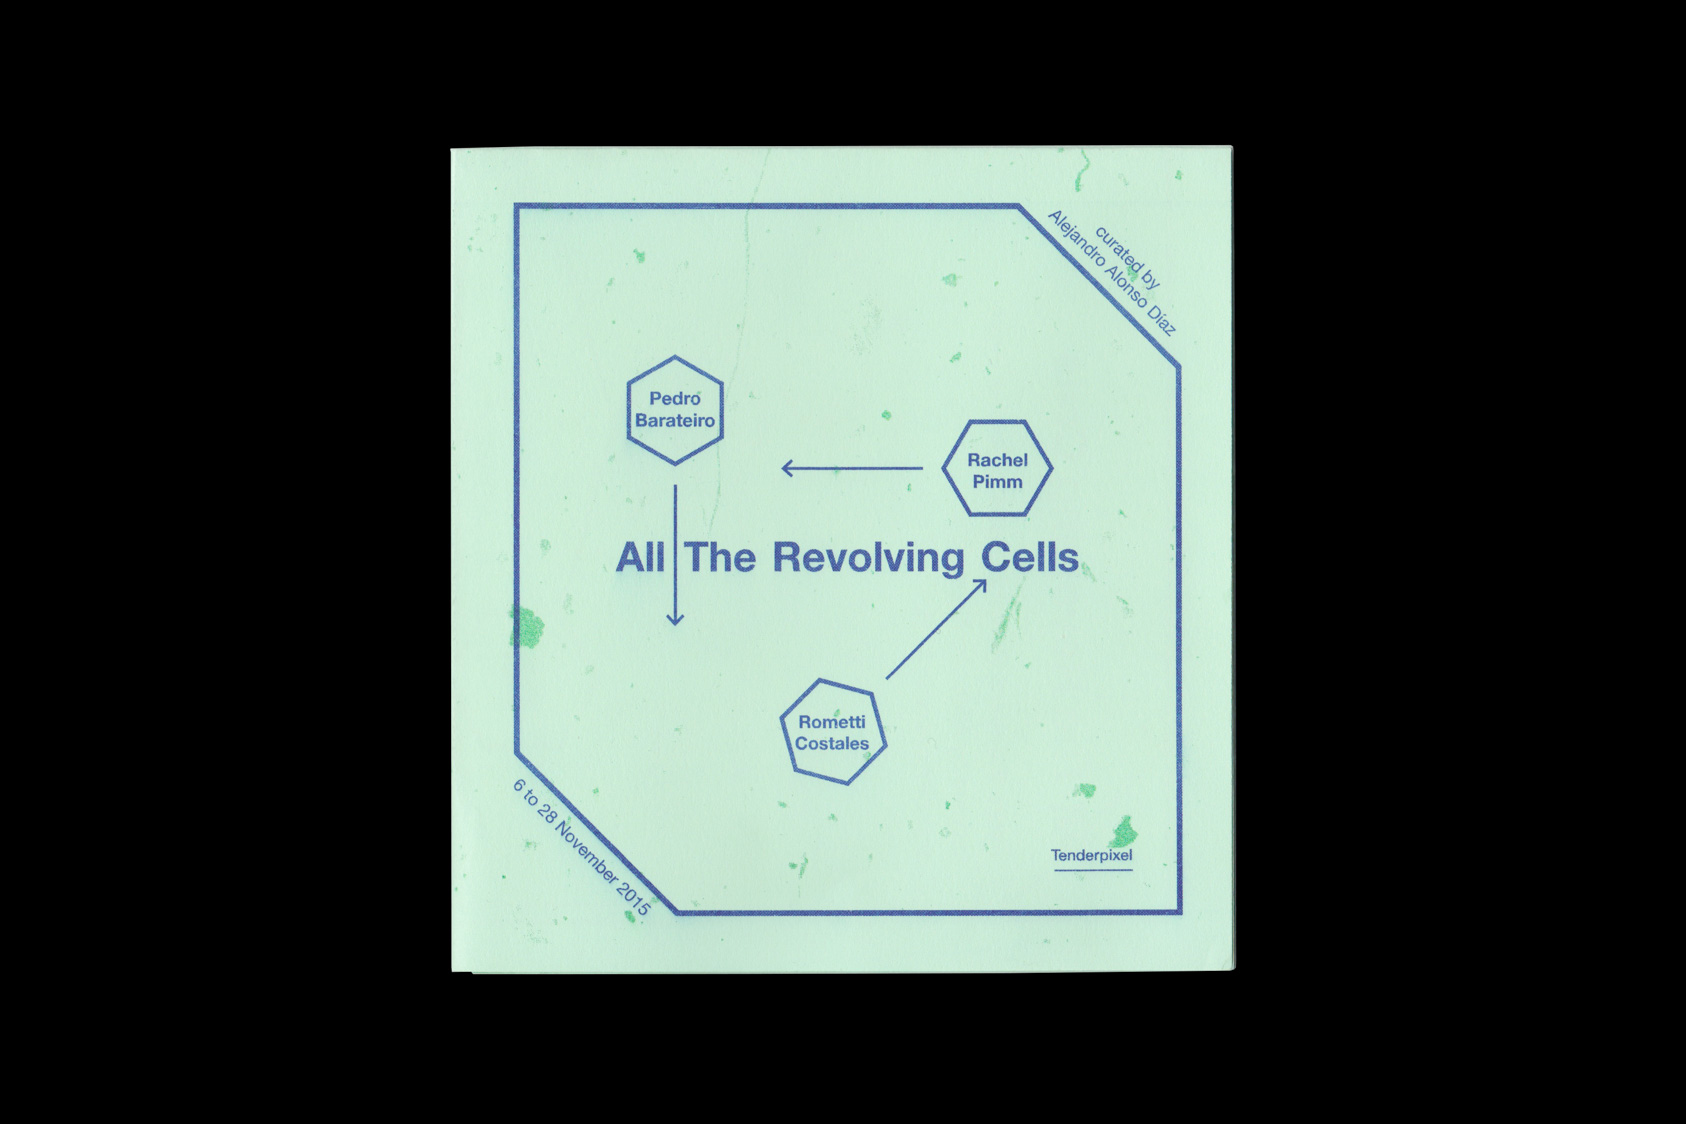 All The Revolving Cells - exhibition handout for Tenderpixel and Alejandro Alonso Diaz, 2015 by the agency for emerging ideas